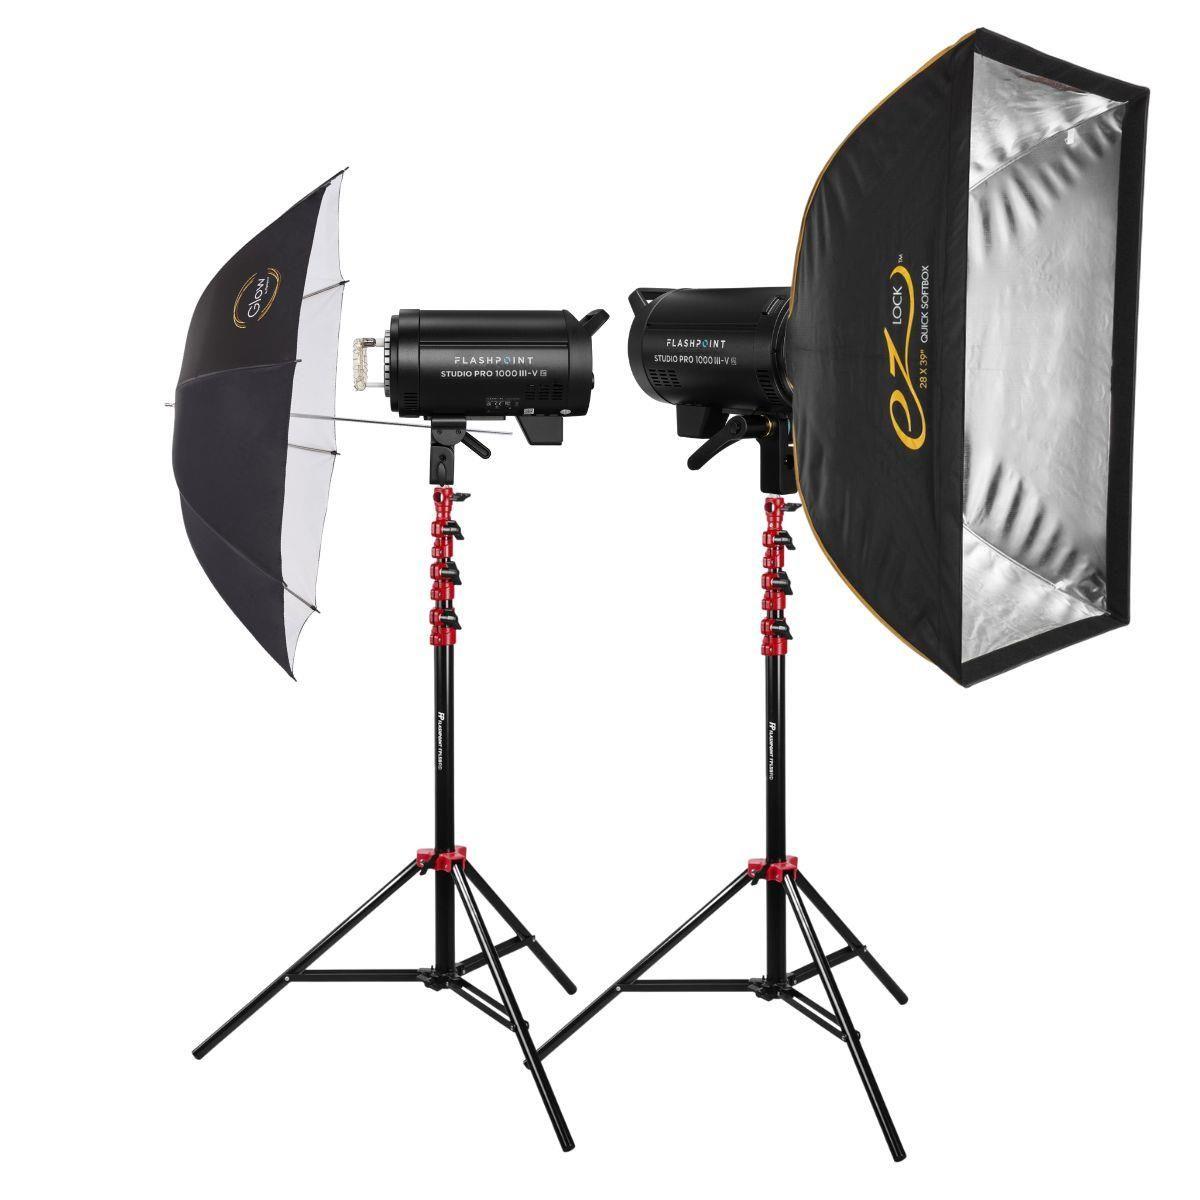 Image of Flashpoint Studio Pro 1000 III-V R2 2-Light Kit with Stands